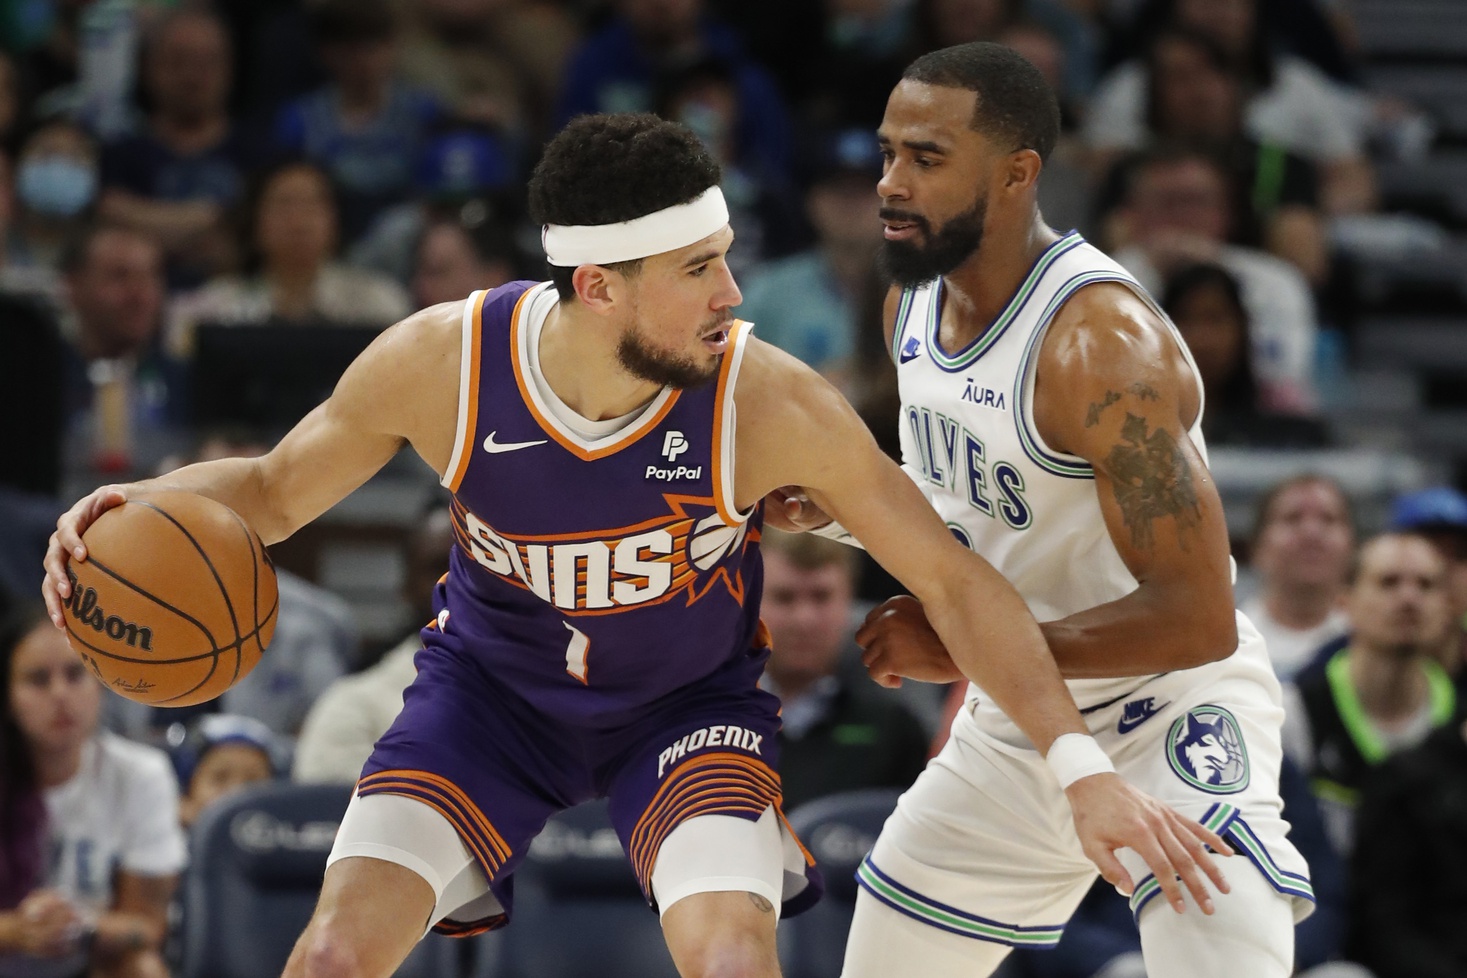 Suns Secure Playoff Spot, Face Timberwolves in First Round